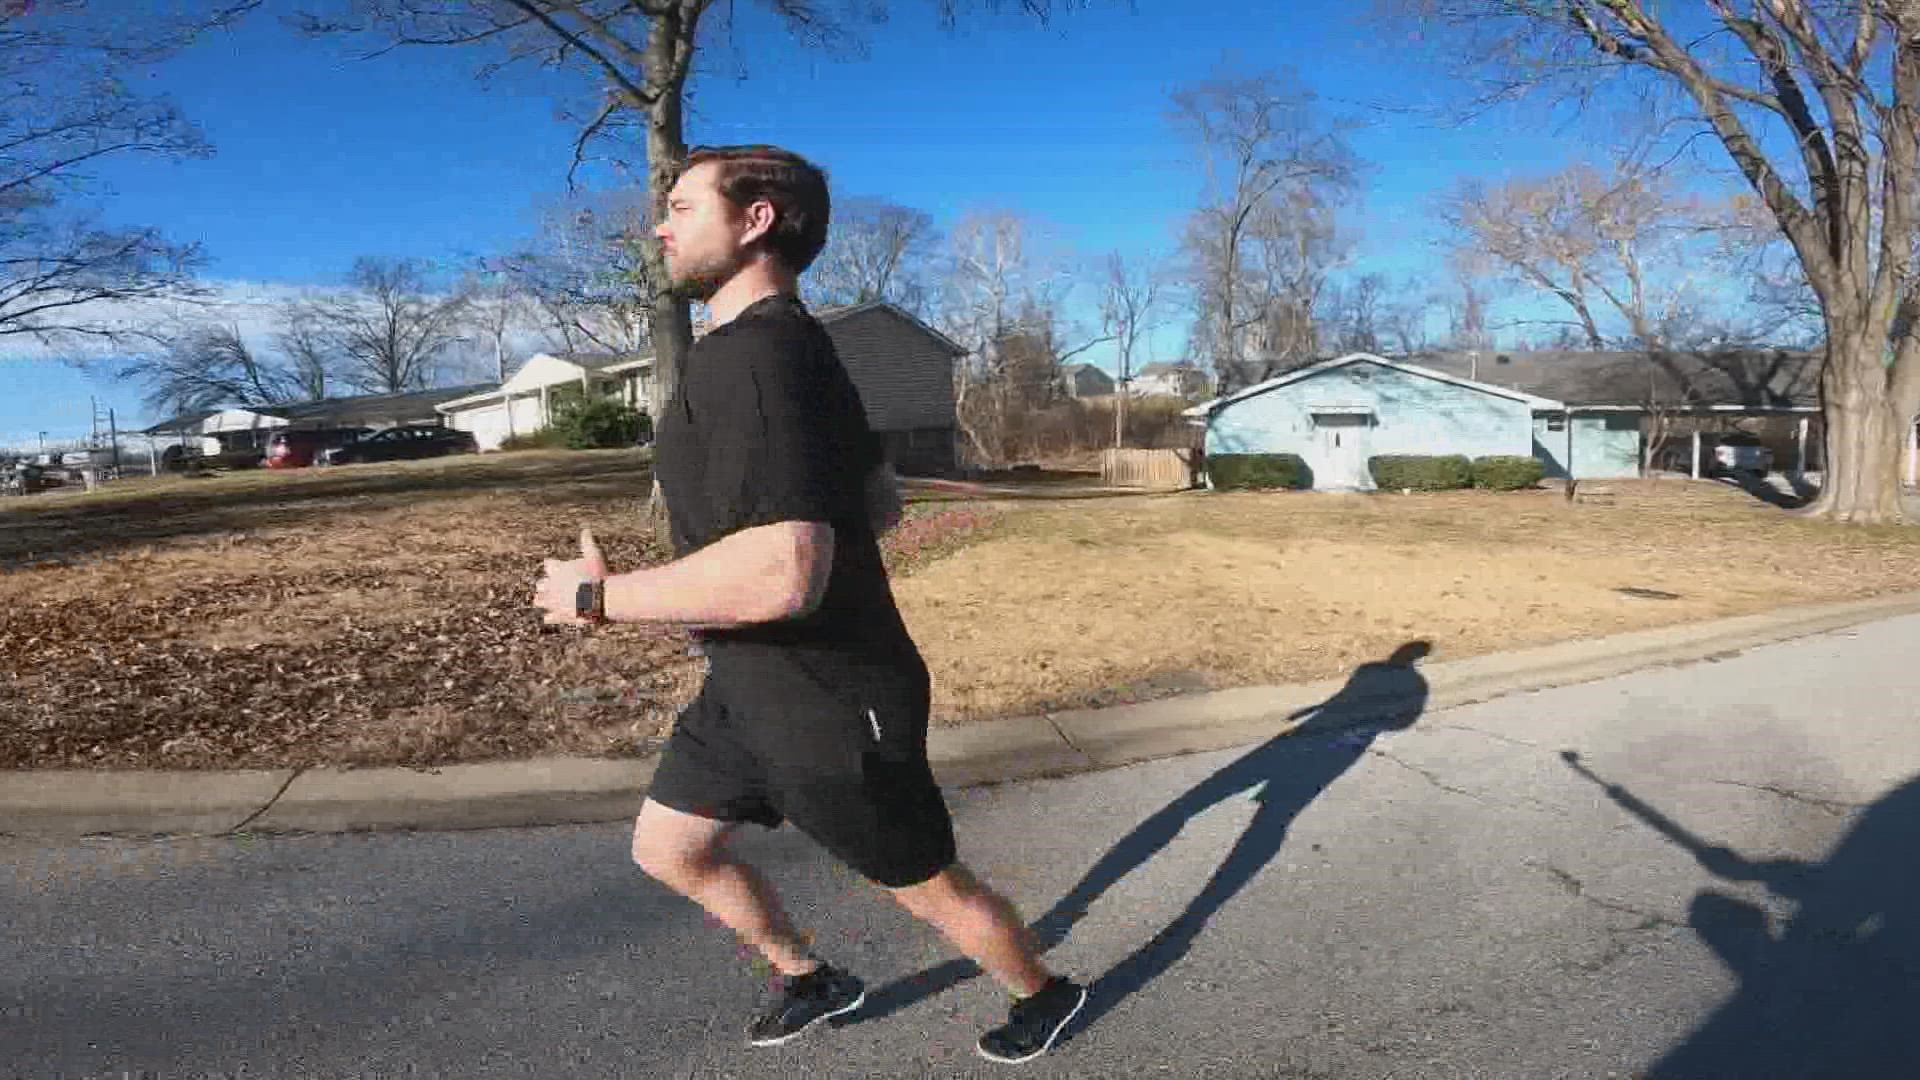 J.T. Thomas, kidney transplant recipient, is running a half-marathon each month to raise funds to help students going through the transplant process.